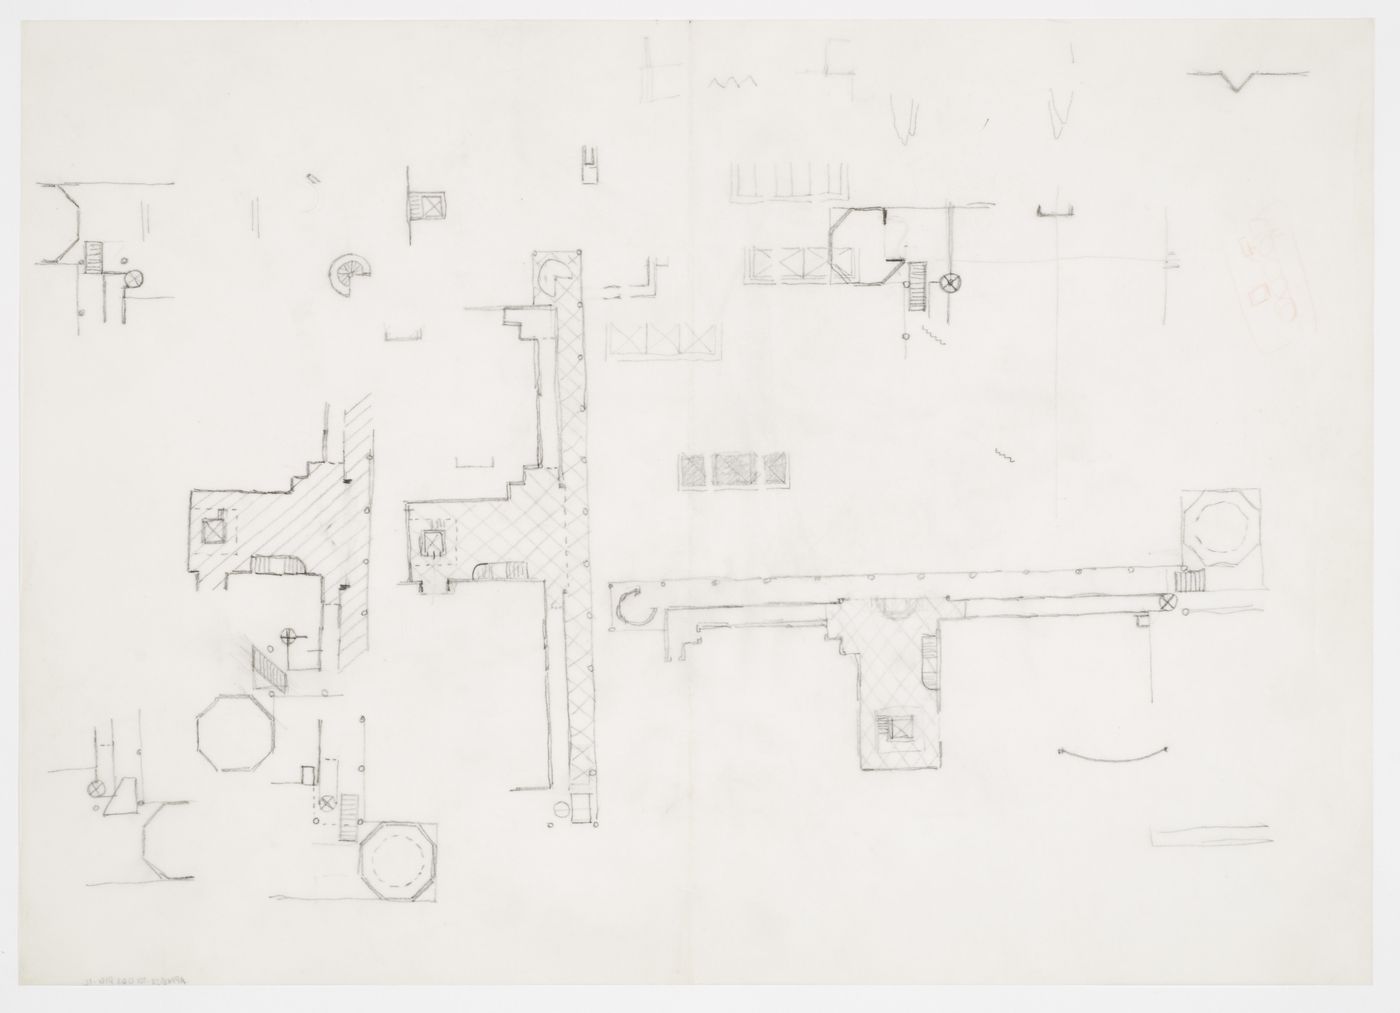 Center for Theatre Arts, Cornell University, Ithaca, New York: plans and sketches